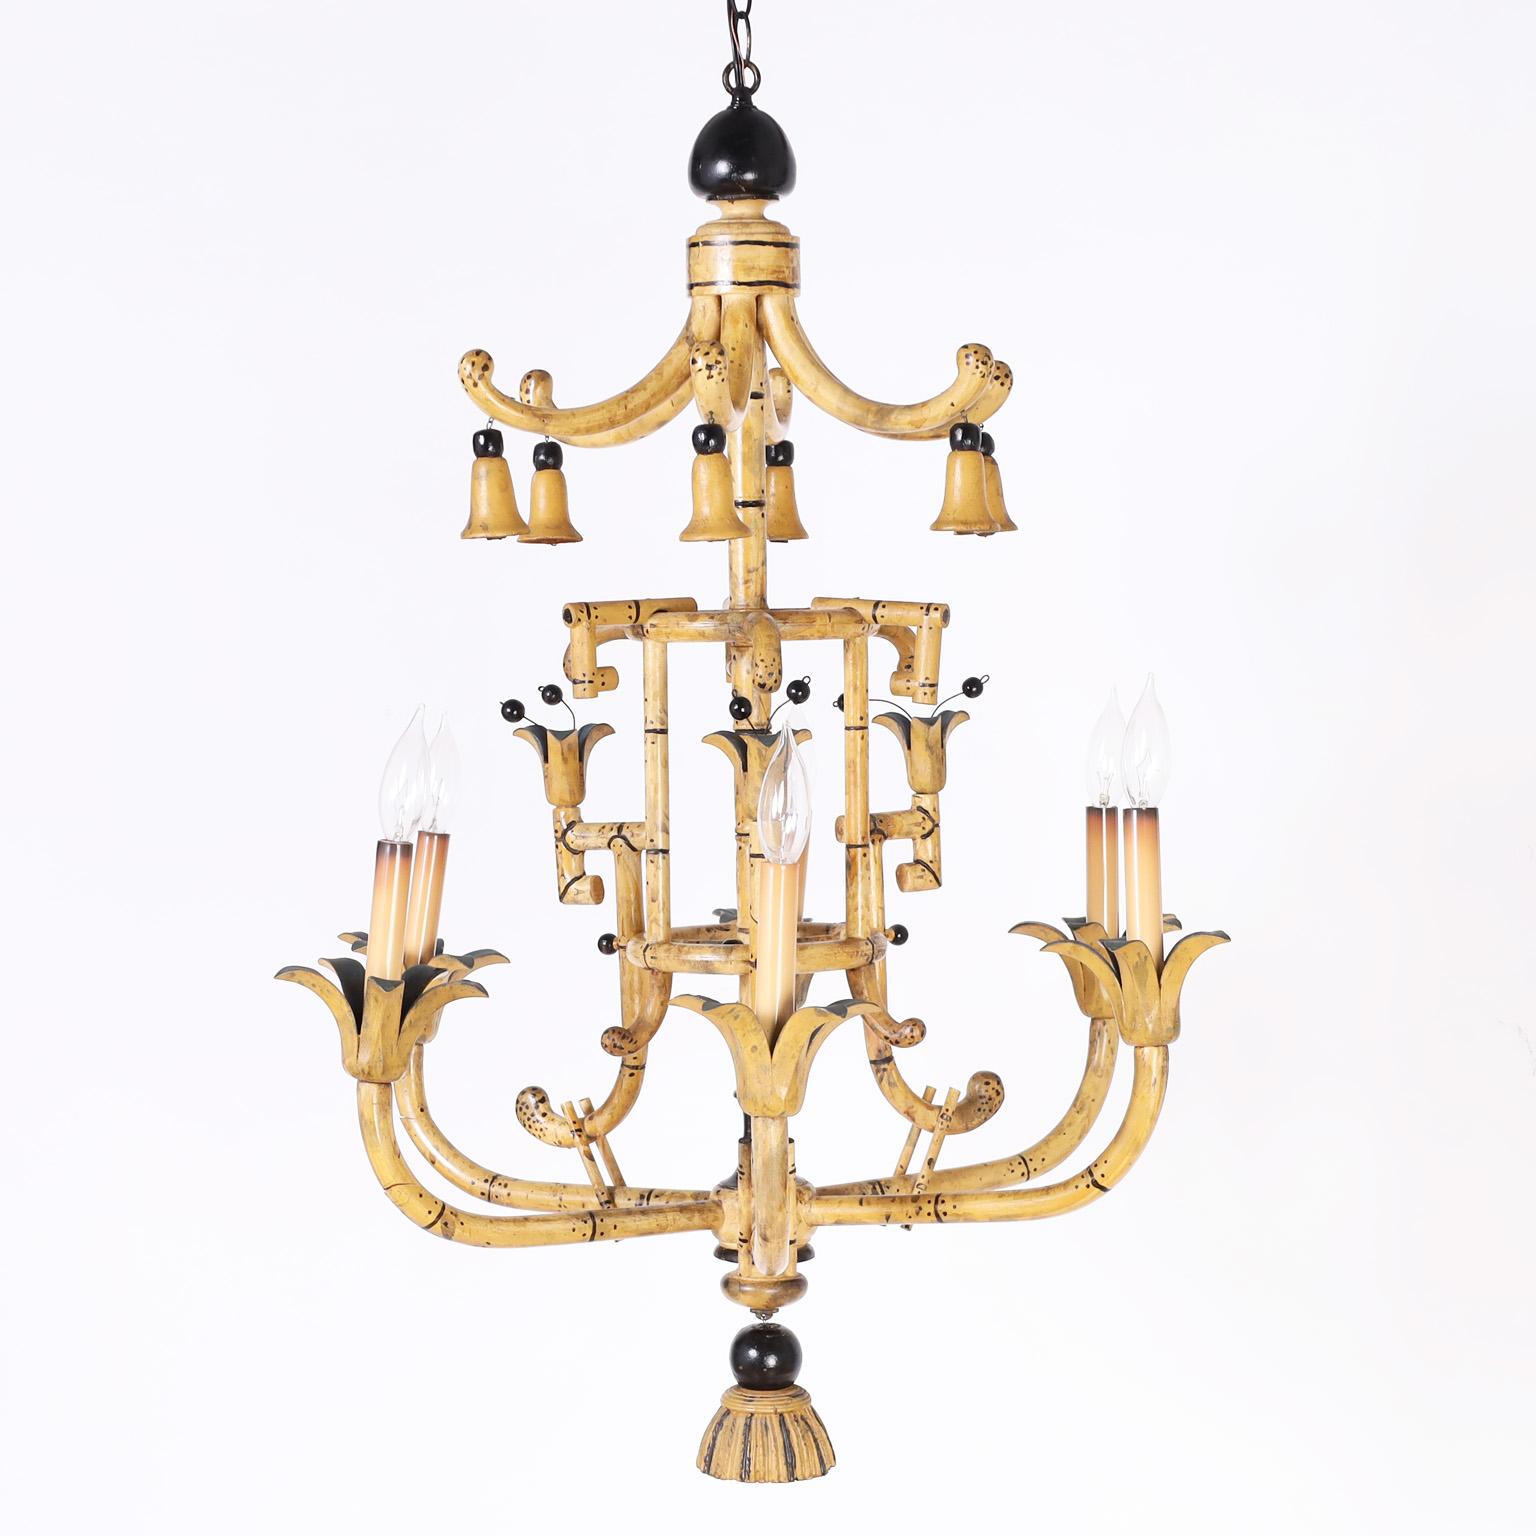 British colonial style six light faux bamboo chandelier crafted in wood with a pagoda style top having tassels, center section with flowers, six arms with floral candle cups, and finished with a wood tassel at the bottom.